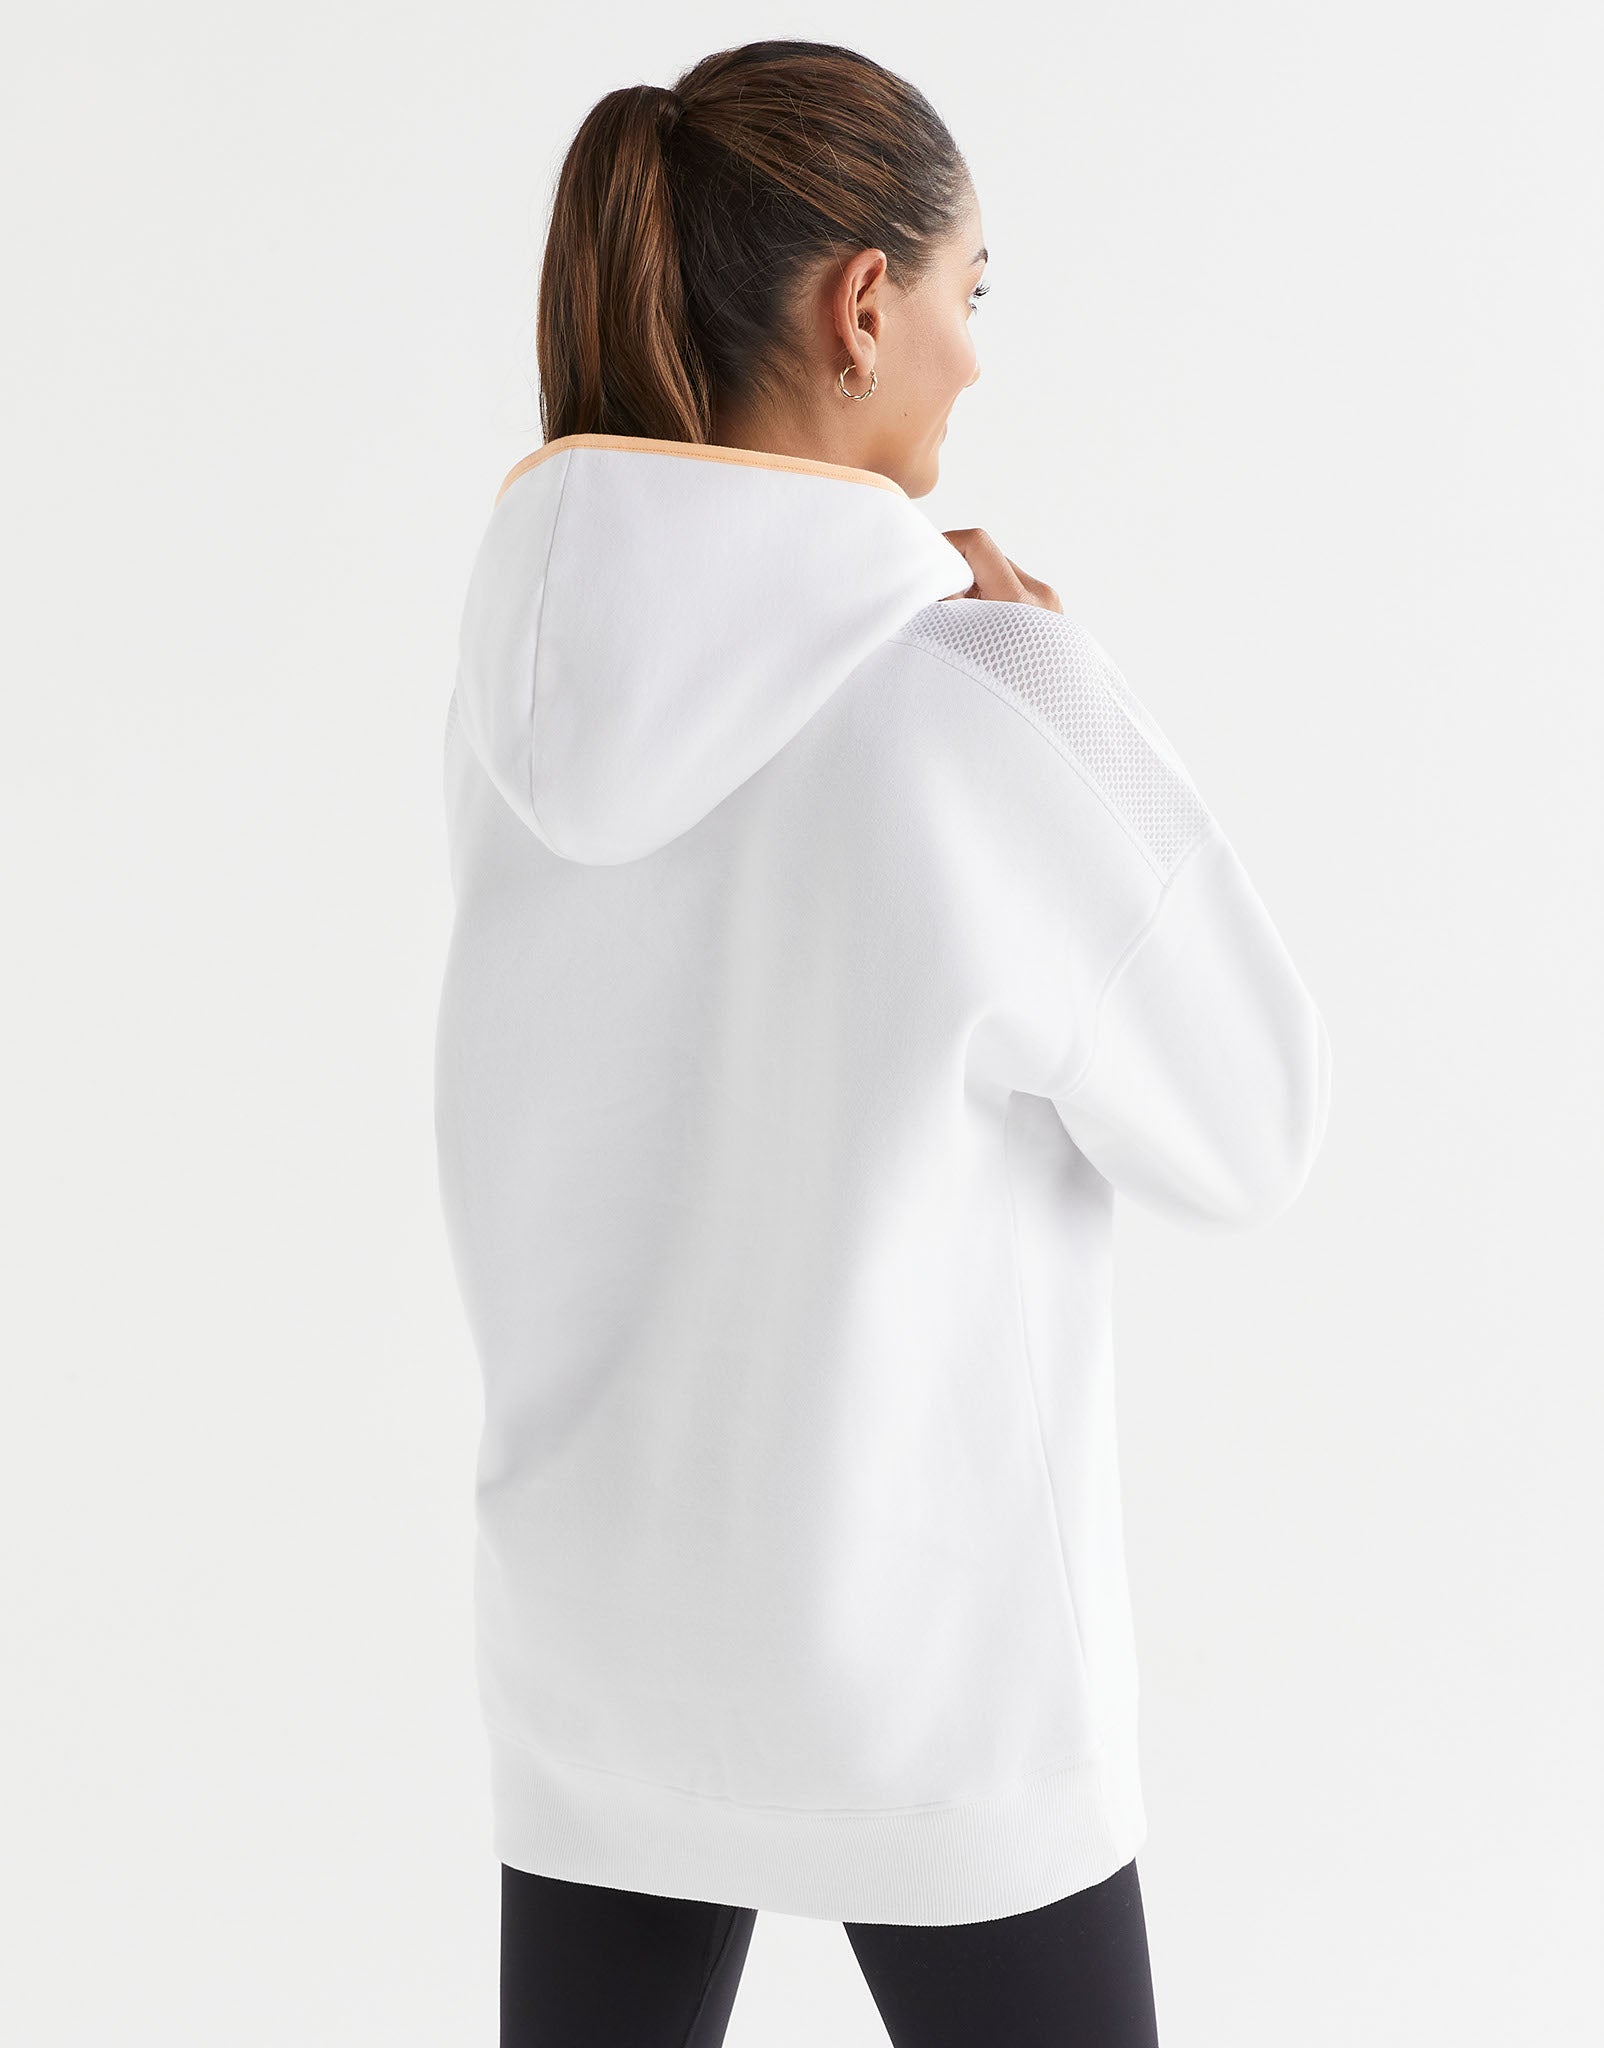 Lilybod-Lucy-Hooded-Sweat-White-LT68-C22-WT-5.jpeg